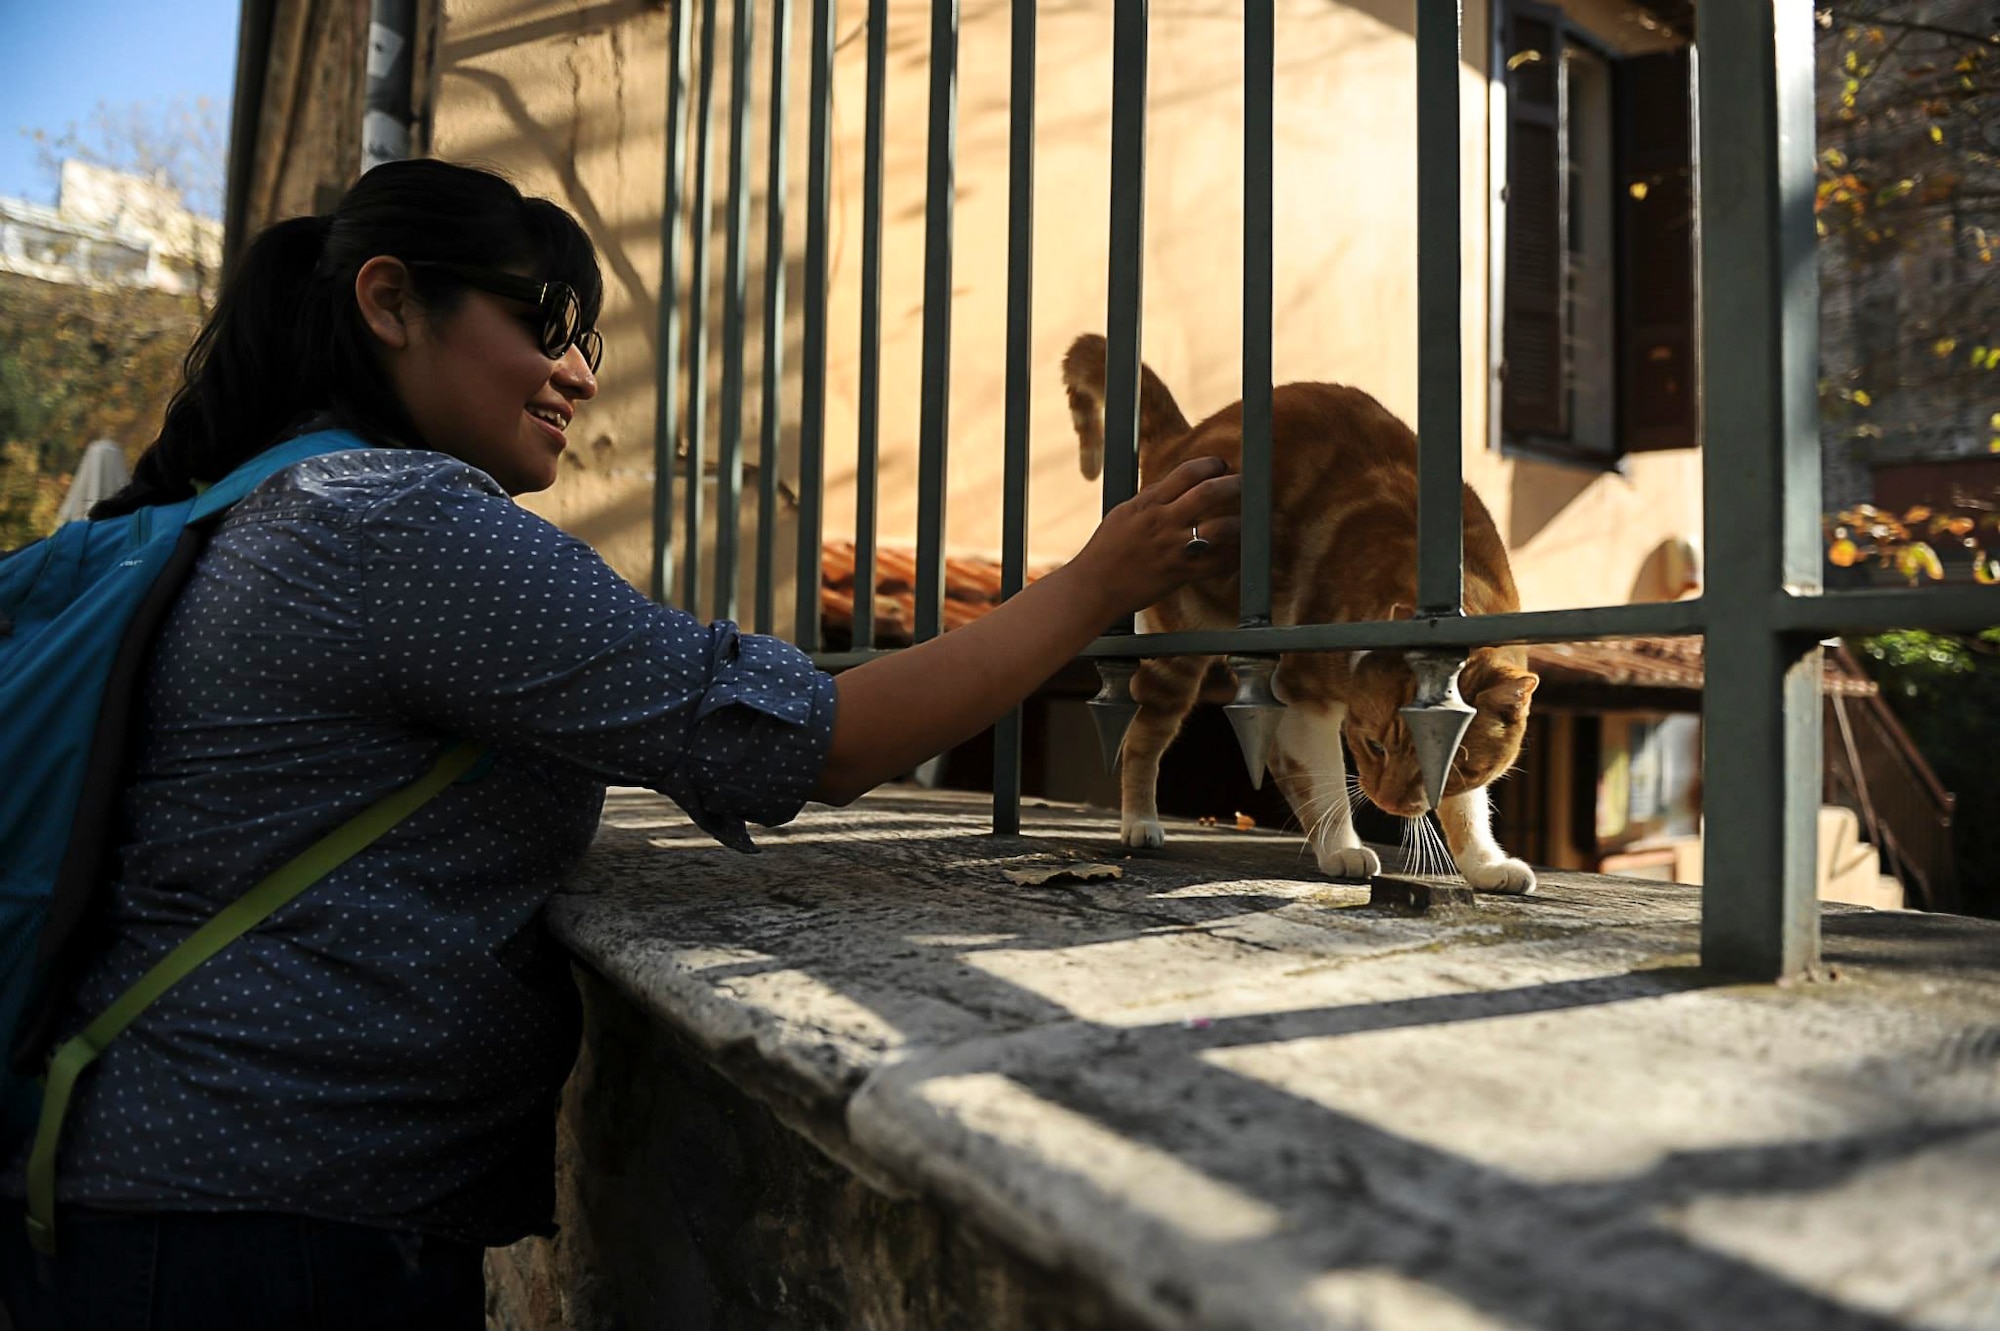 Cecelia Guadalupe Ortiz-Barreiro pets a cat outside of a church Nov. 16, 2013, in Thessaloniki, Greece. Two years removed from a nervous breakdown, Cece credits family support with her recovery and perseverance. (Courtesy photo/Jake Barreiro)  